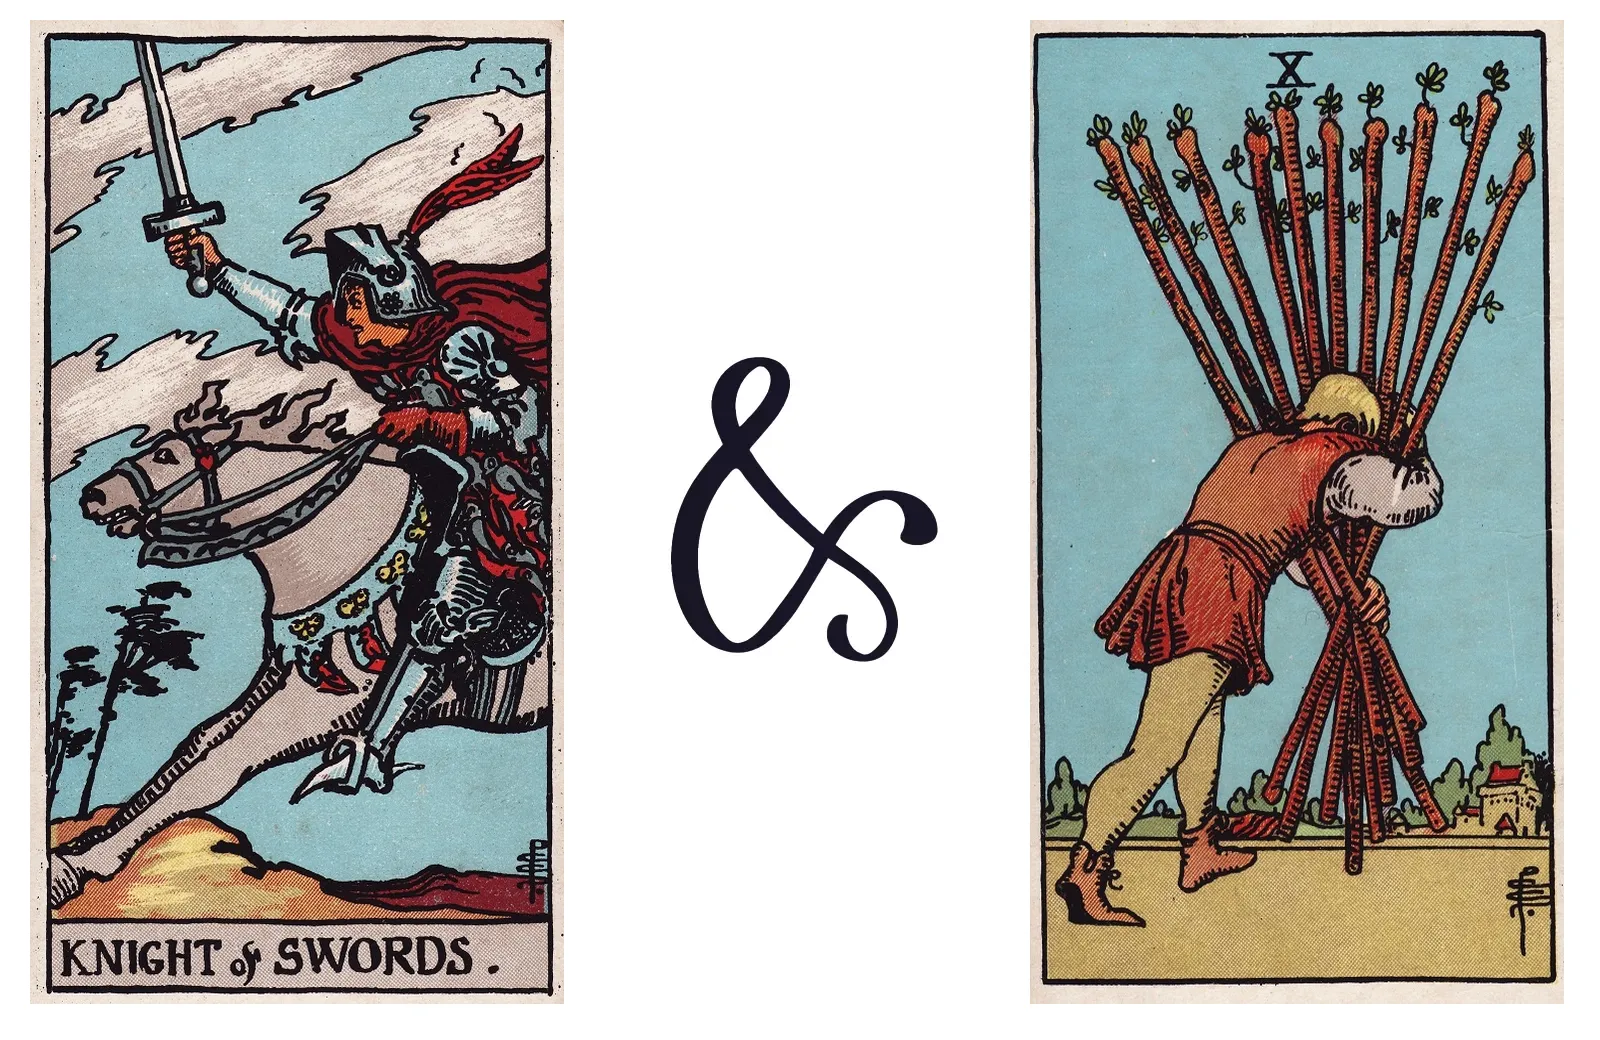 Knight of Swords and Ten of Wands